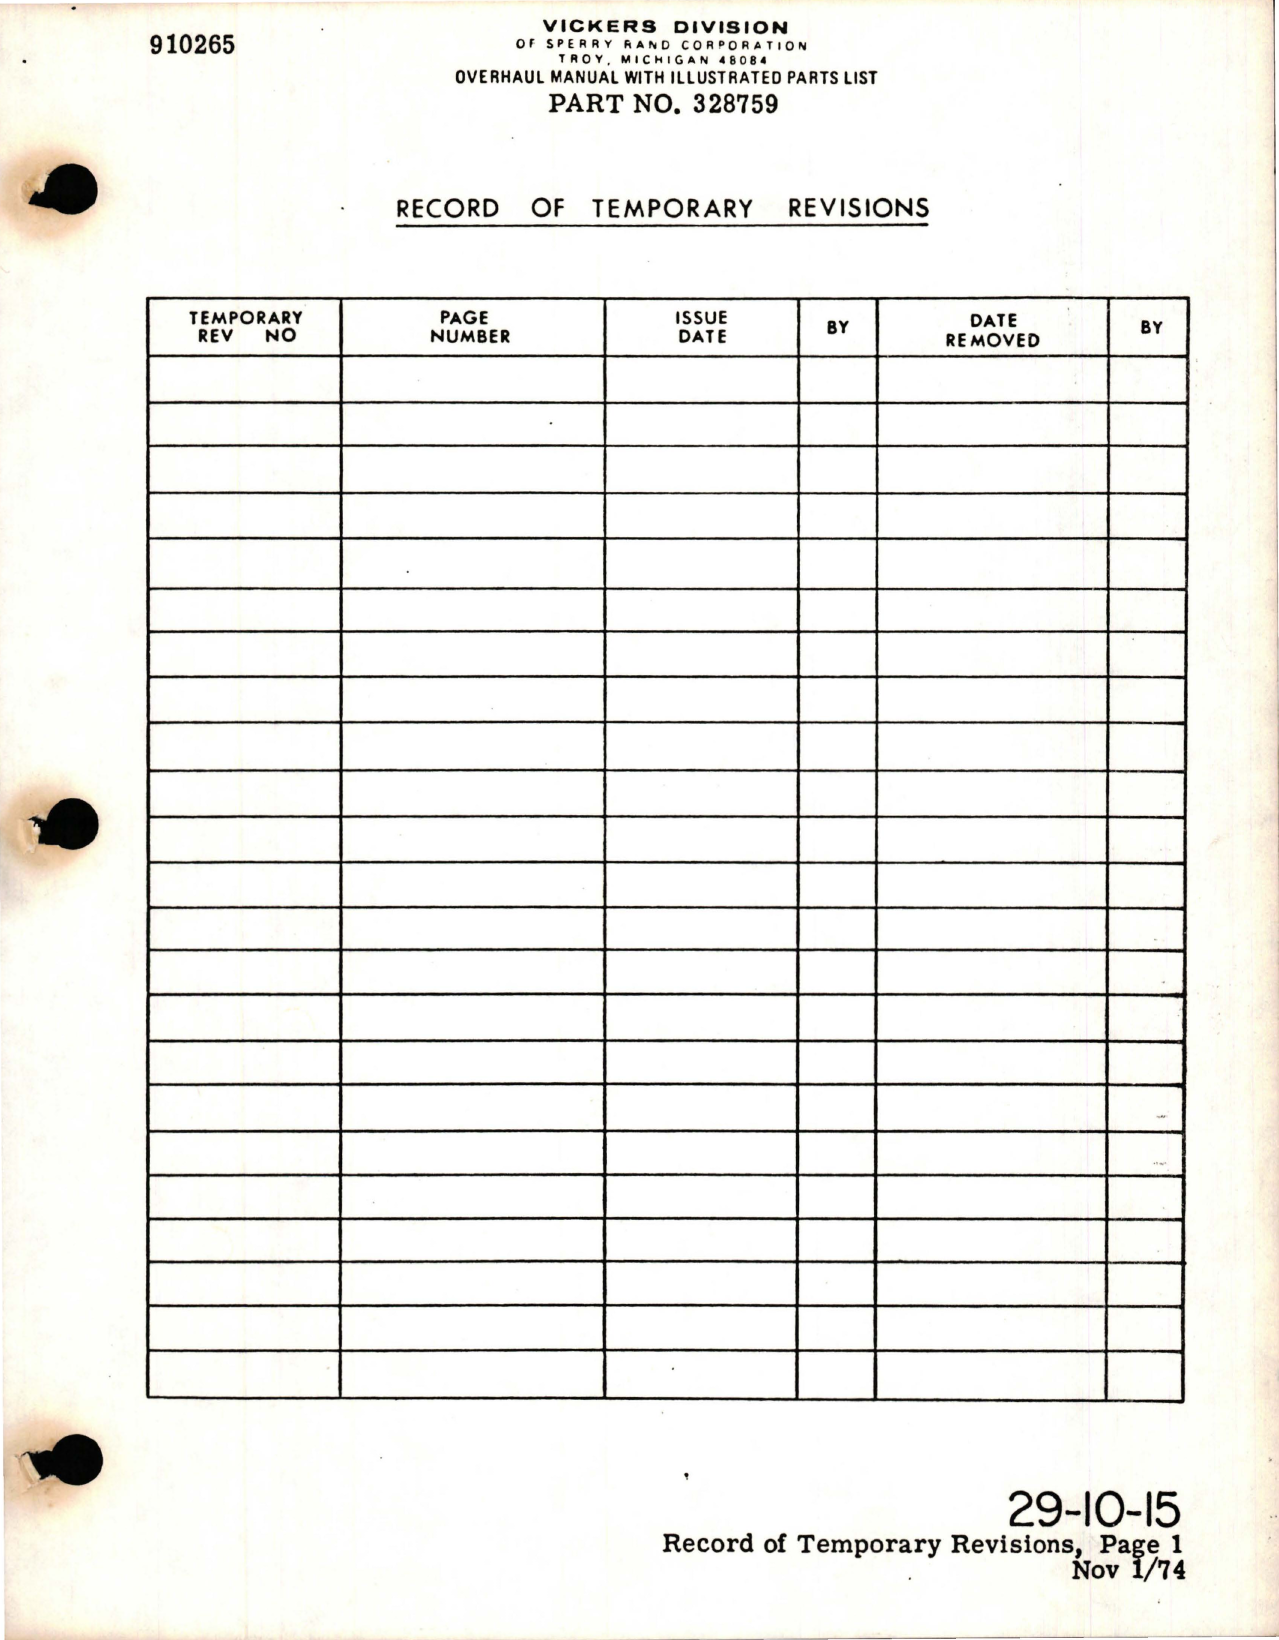 Sample page 5 from AirCorps Library document: Overhaul with Illustrated Parts List for Hydraulic Motorpump - Part 328759 - Model MPEV3-022-3A